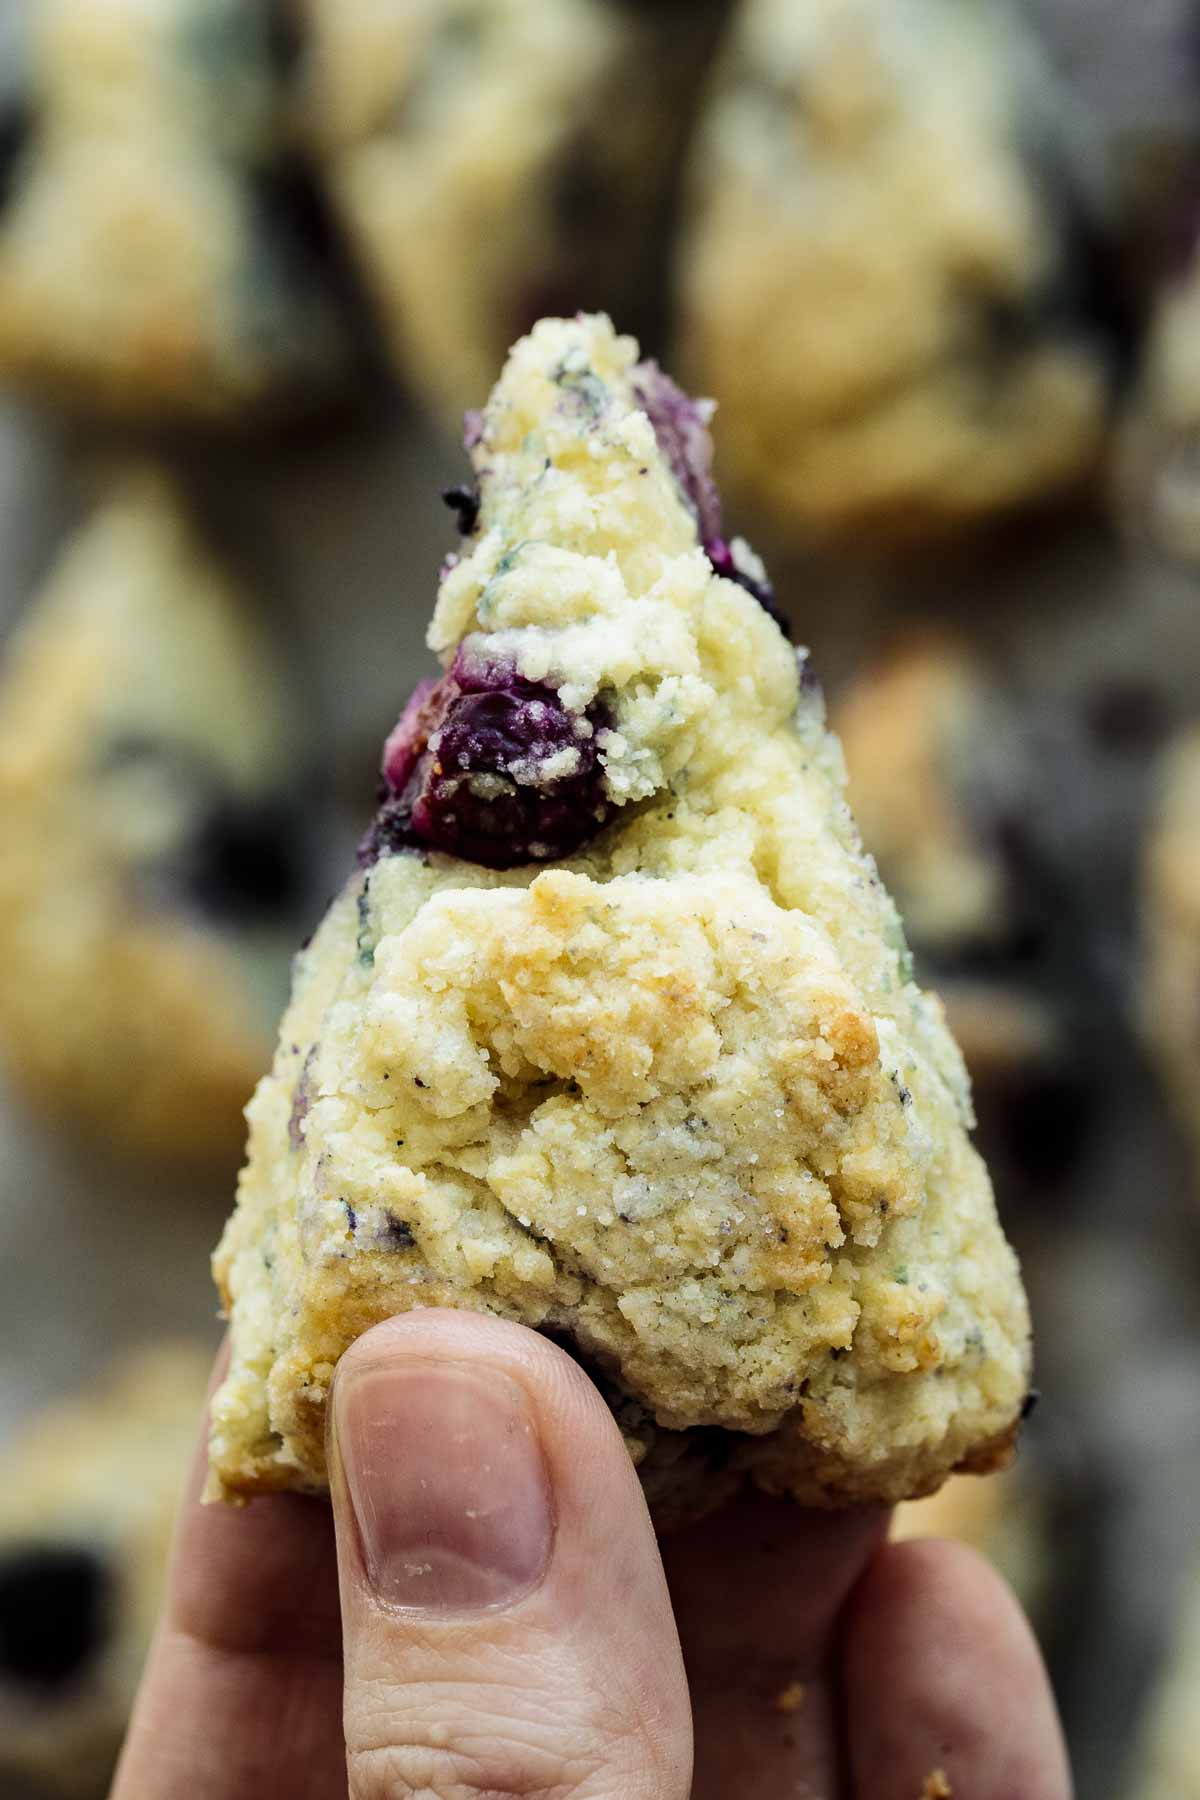 Hand holding a baked blueberry scone.